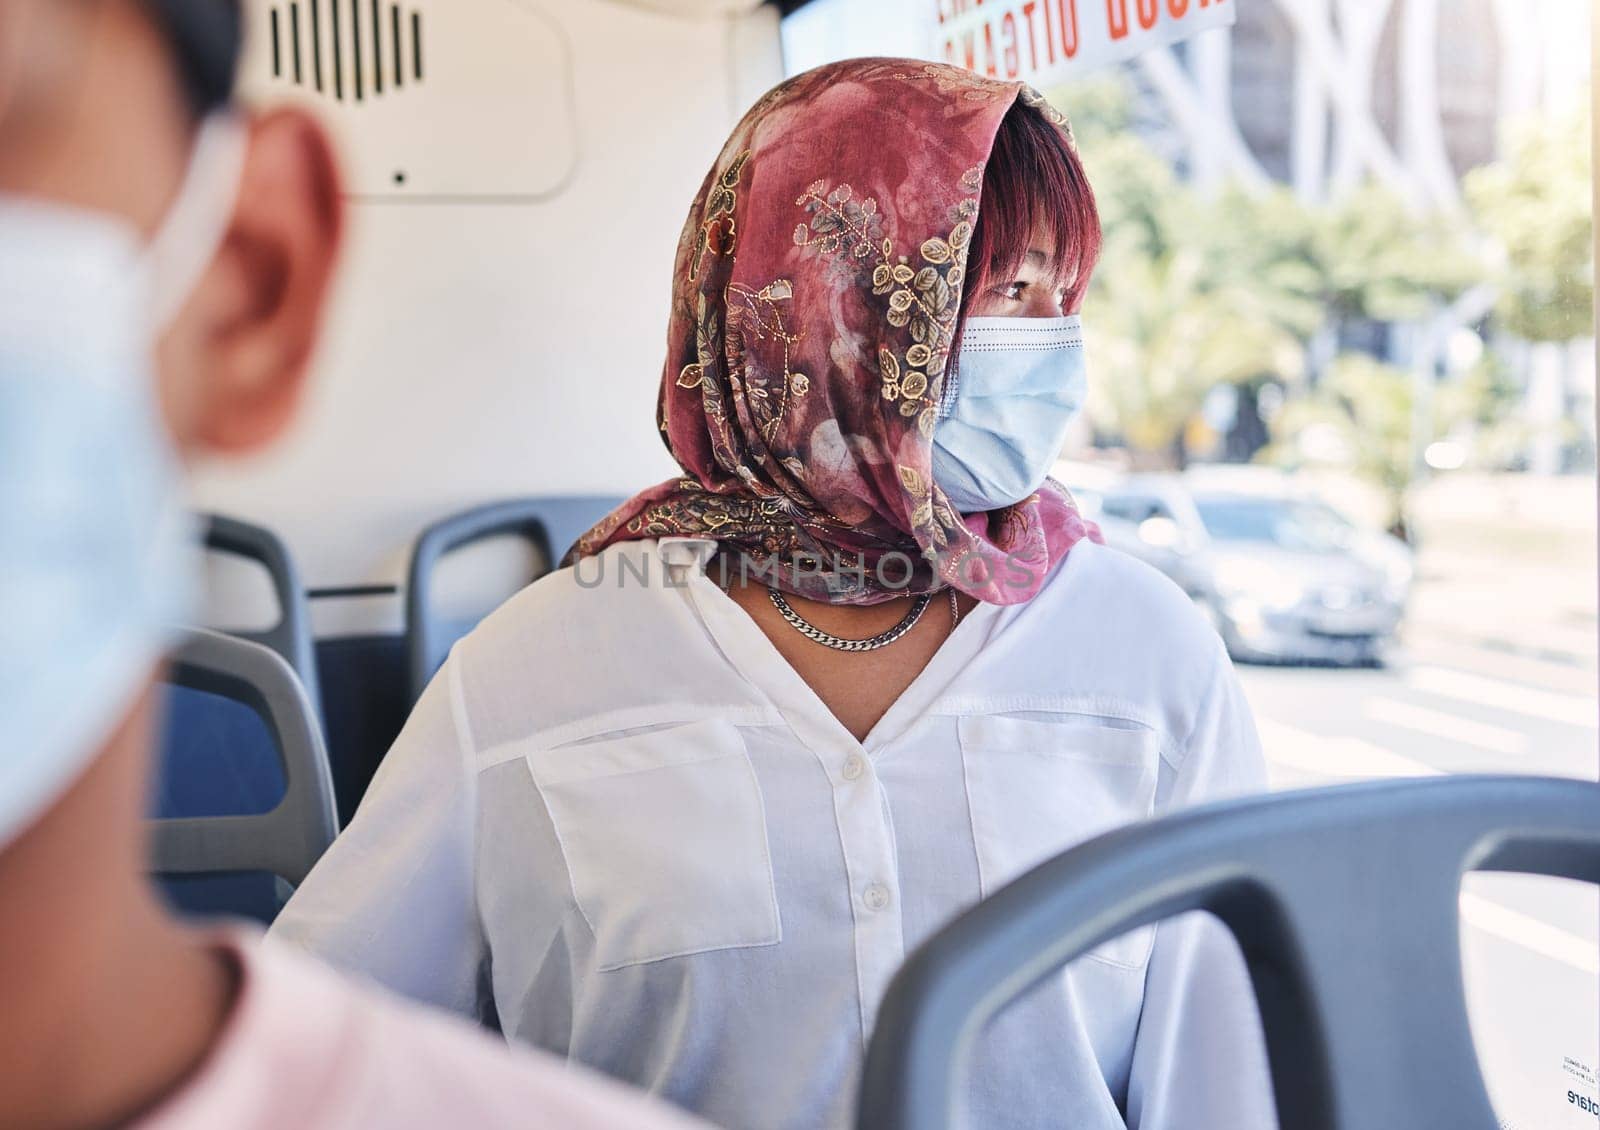 Woman, muslim and bus with mask, covid and healthcare on transport in city, town or metro by window. Islam lady, covid 19 and ppe on transportation for travel, urban adventure or thinking of safety.